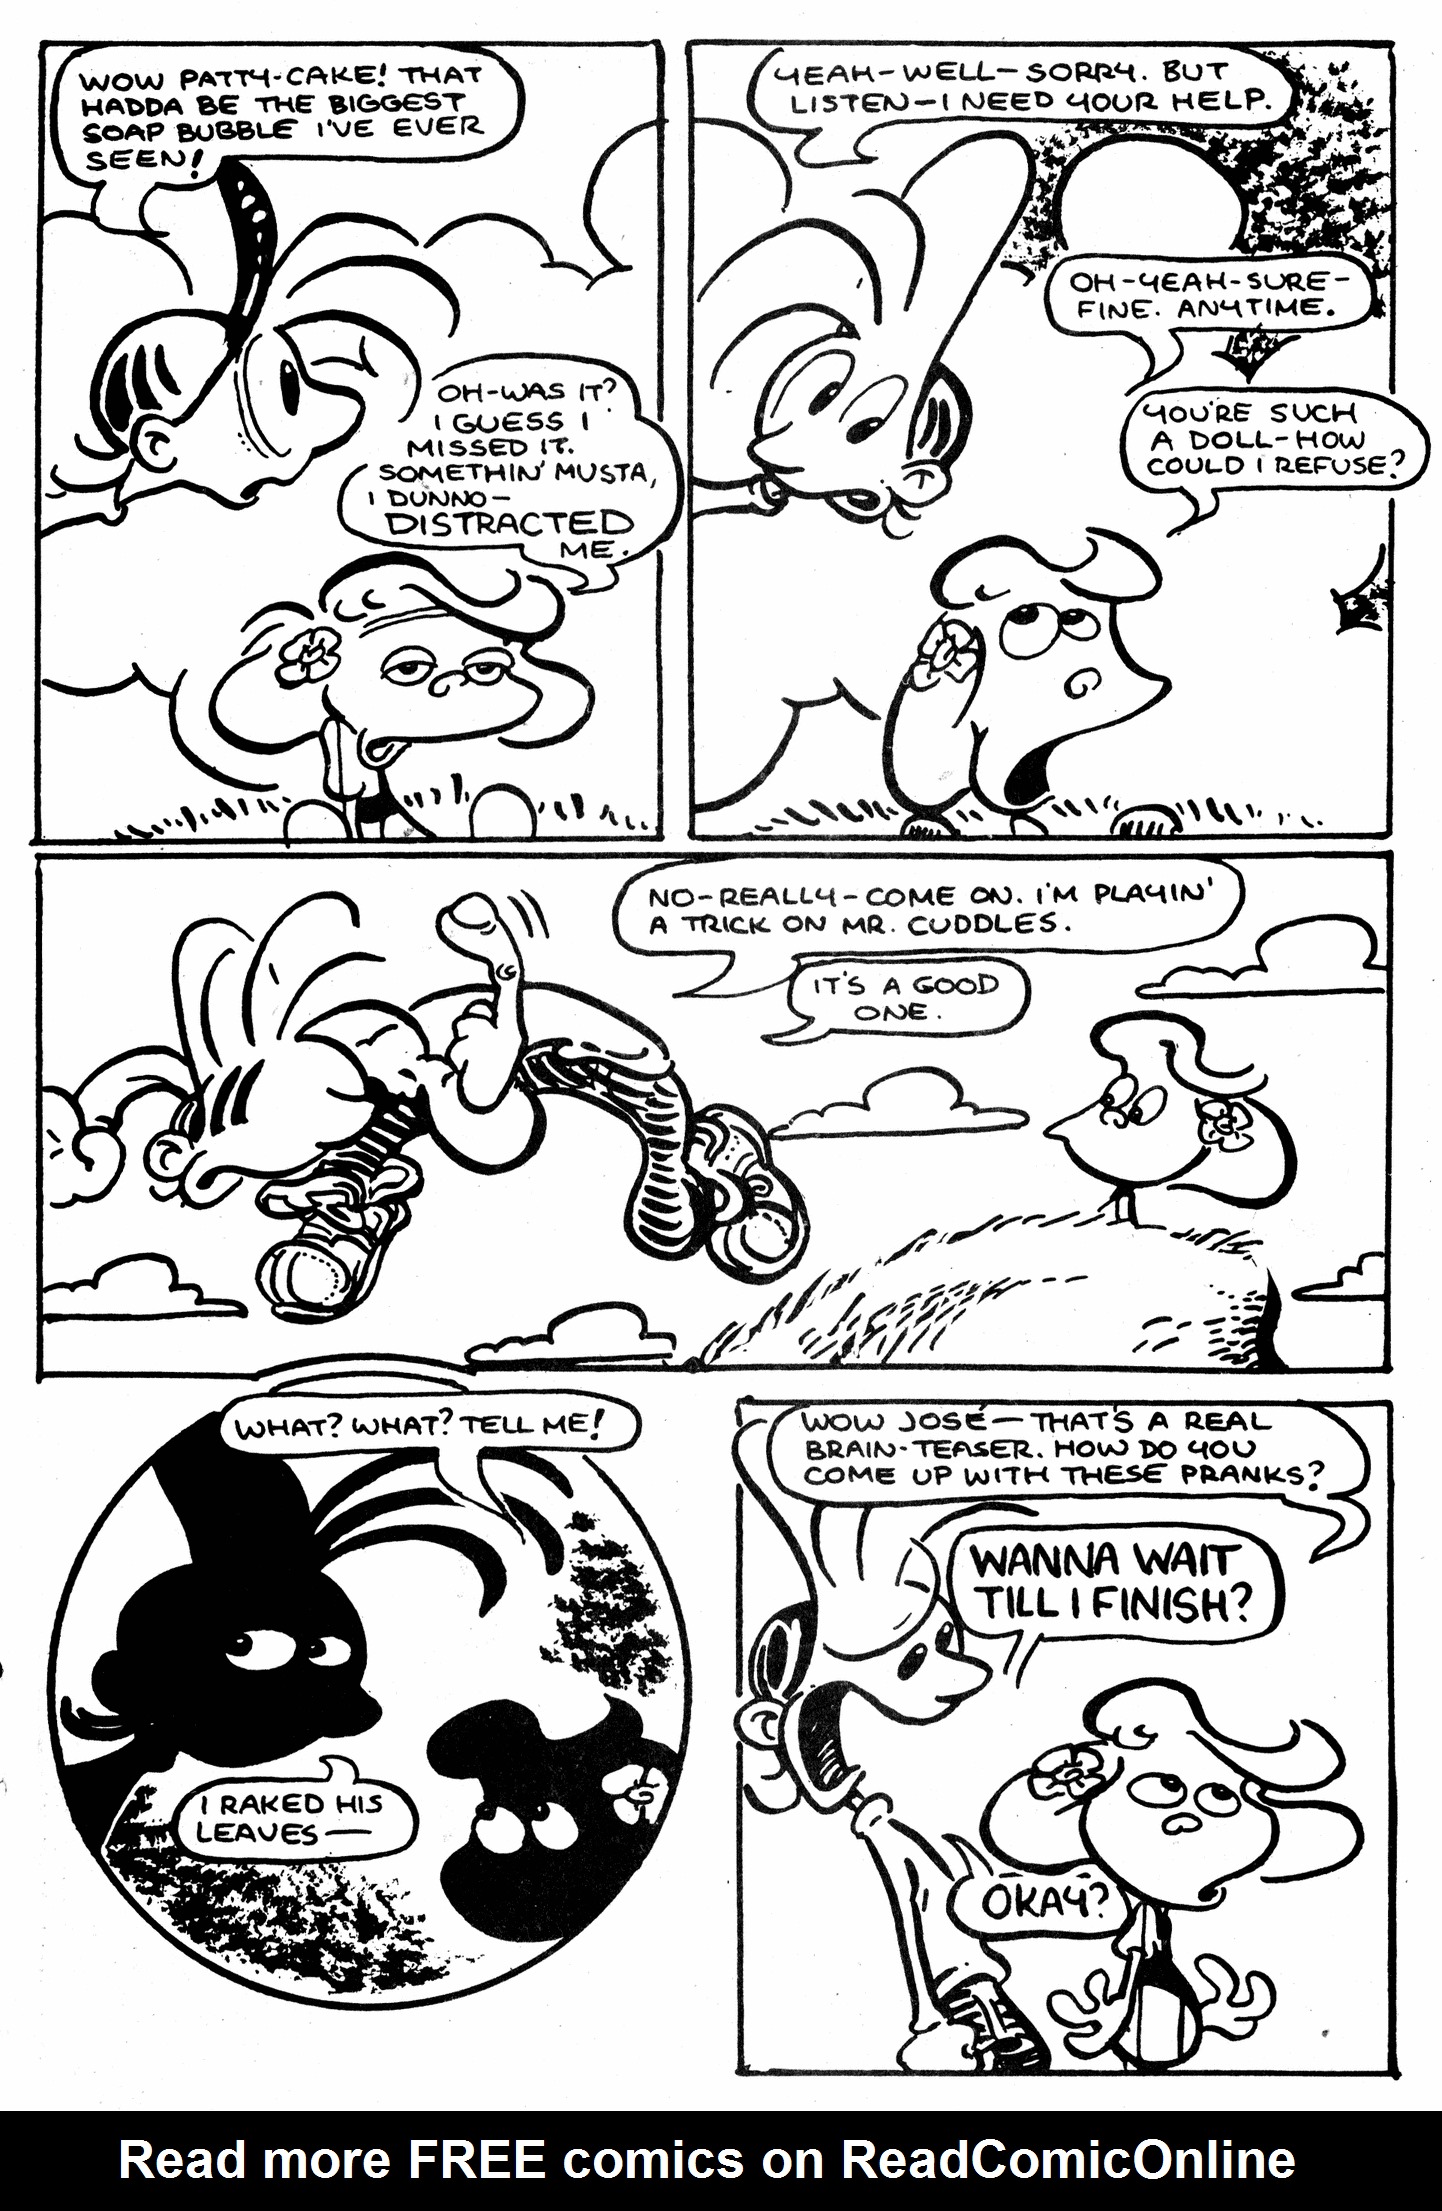 Read online Patty Cake comic -  Issue #3 - 24